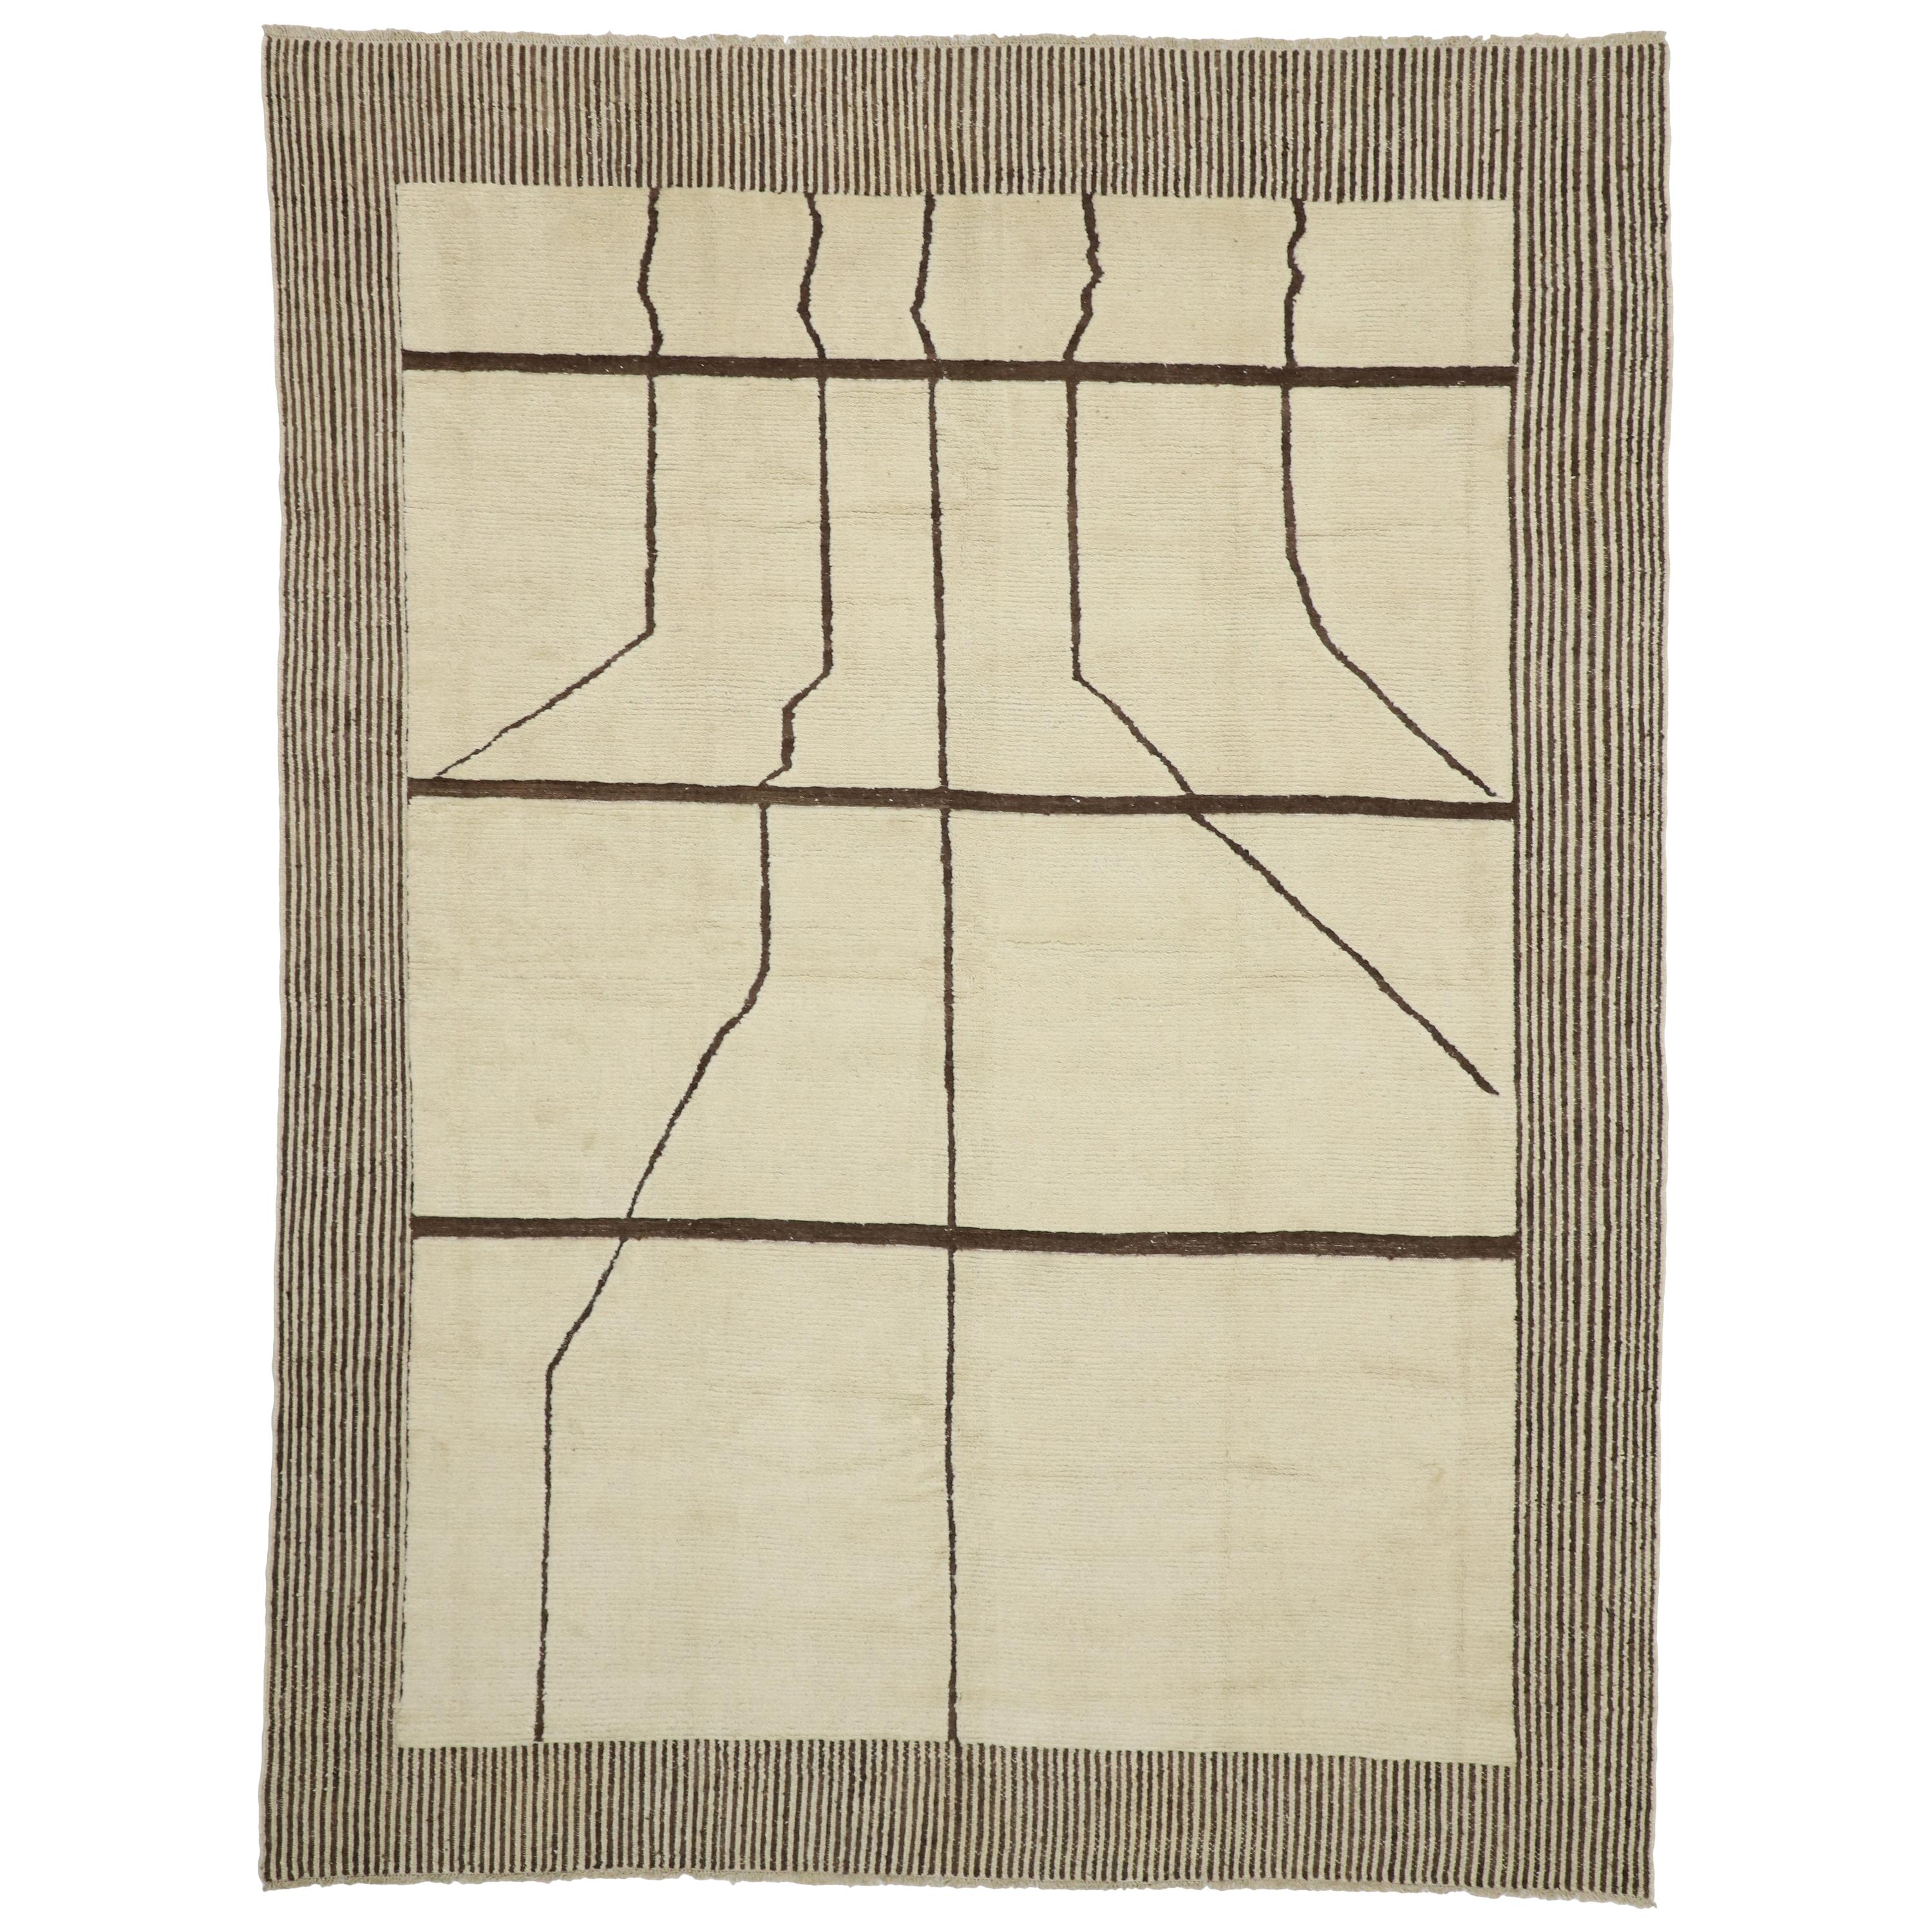 New Contemporary Moroccan Area Rug with Organic Modern Line Art Style